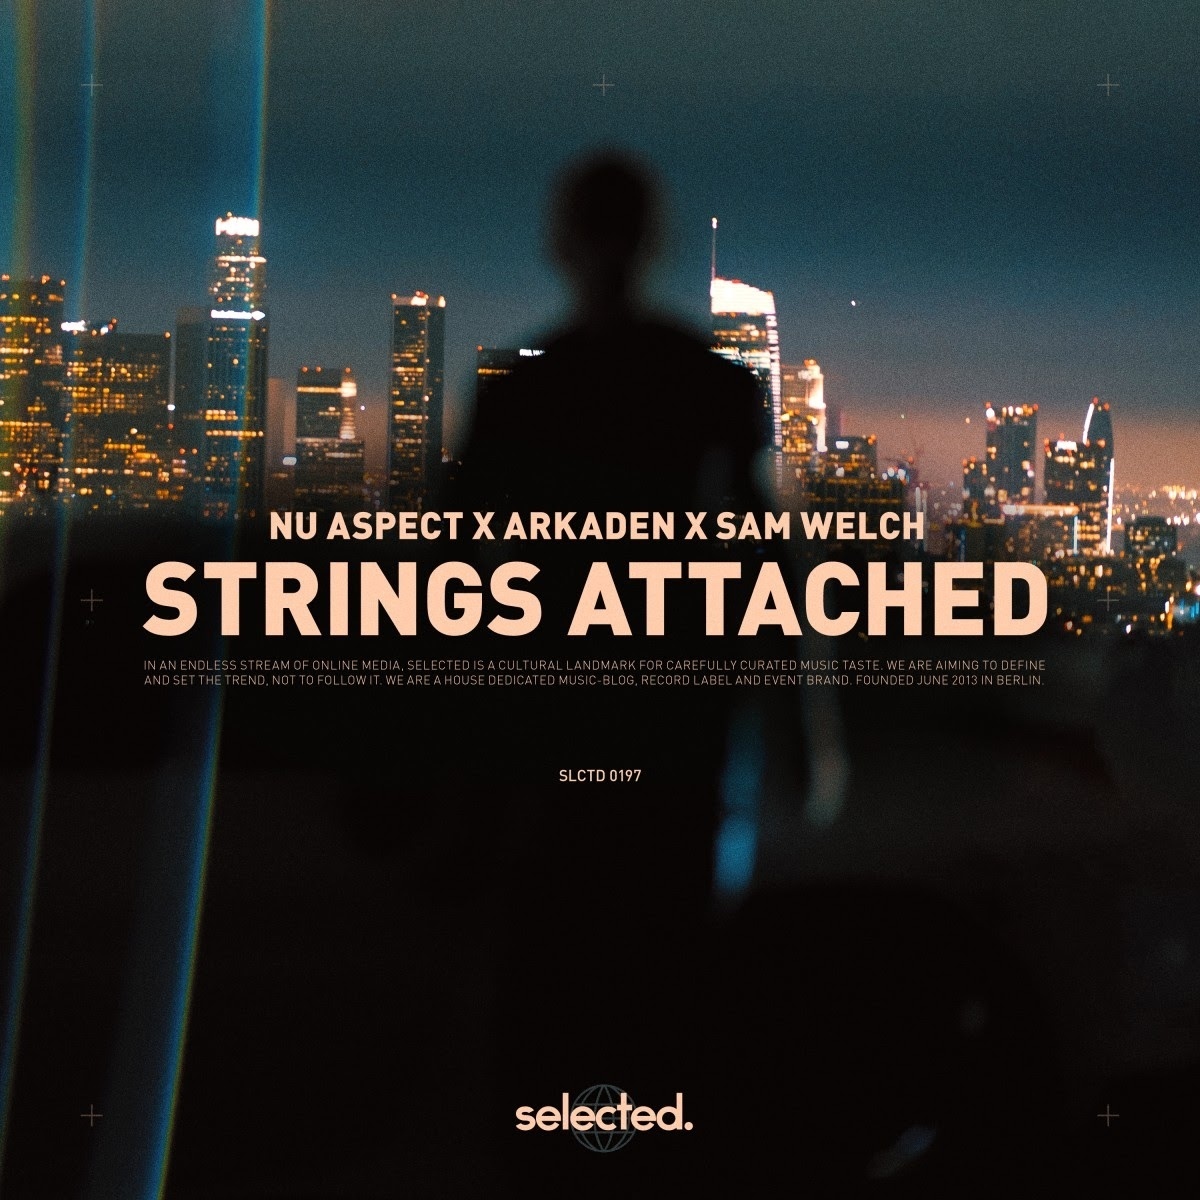 Nu Aspect X Arkaden X Sam Welch - Strings Attached (extended Mix) on Revolution Radio